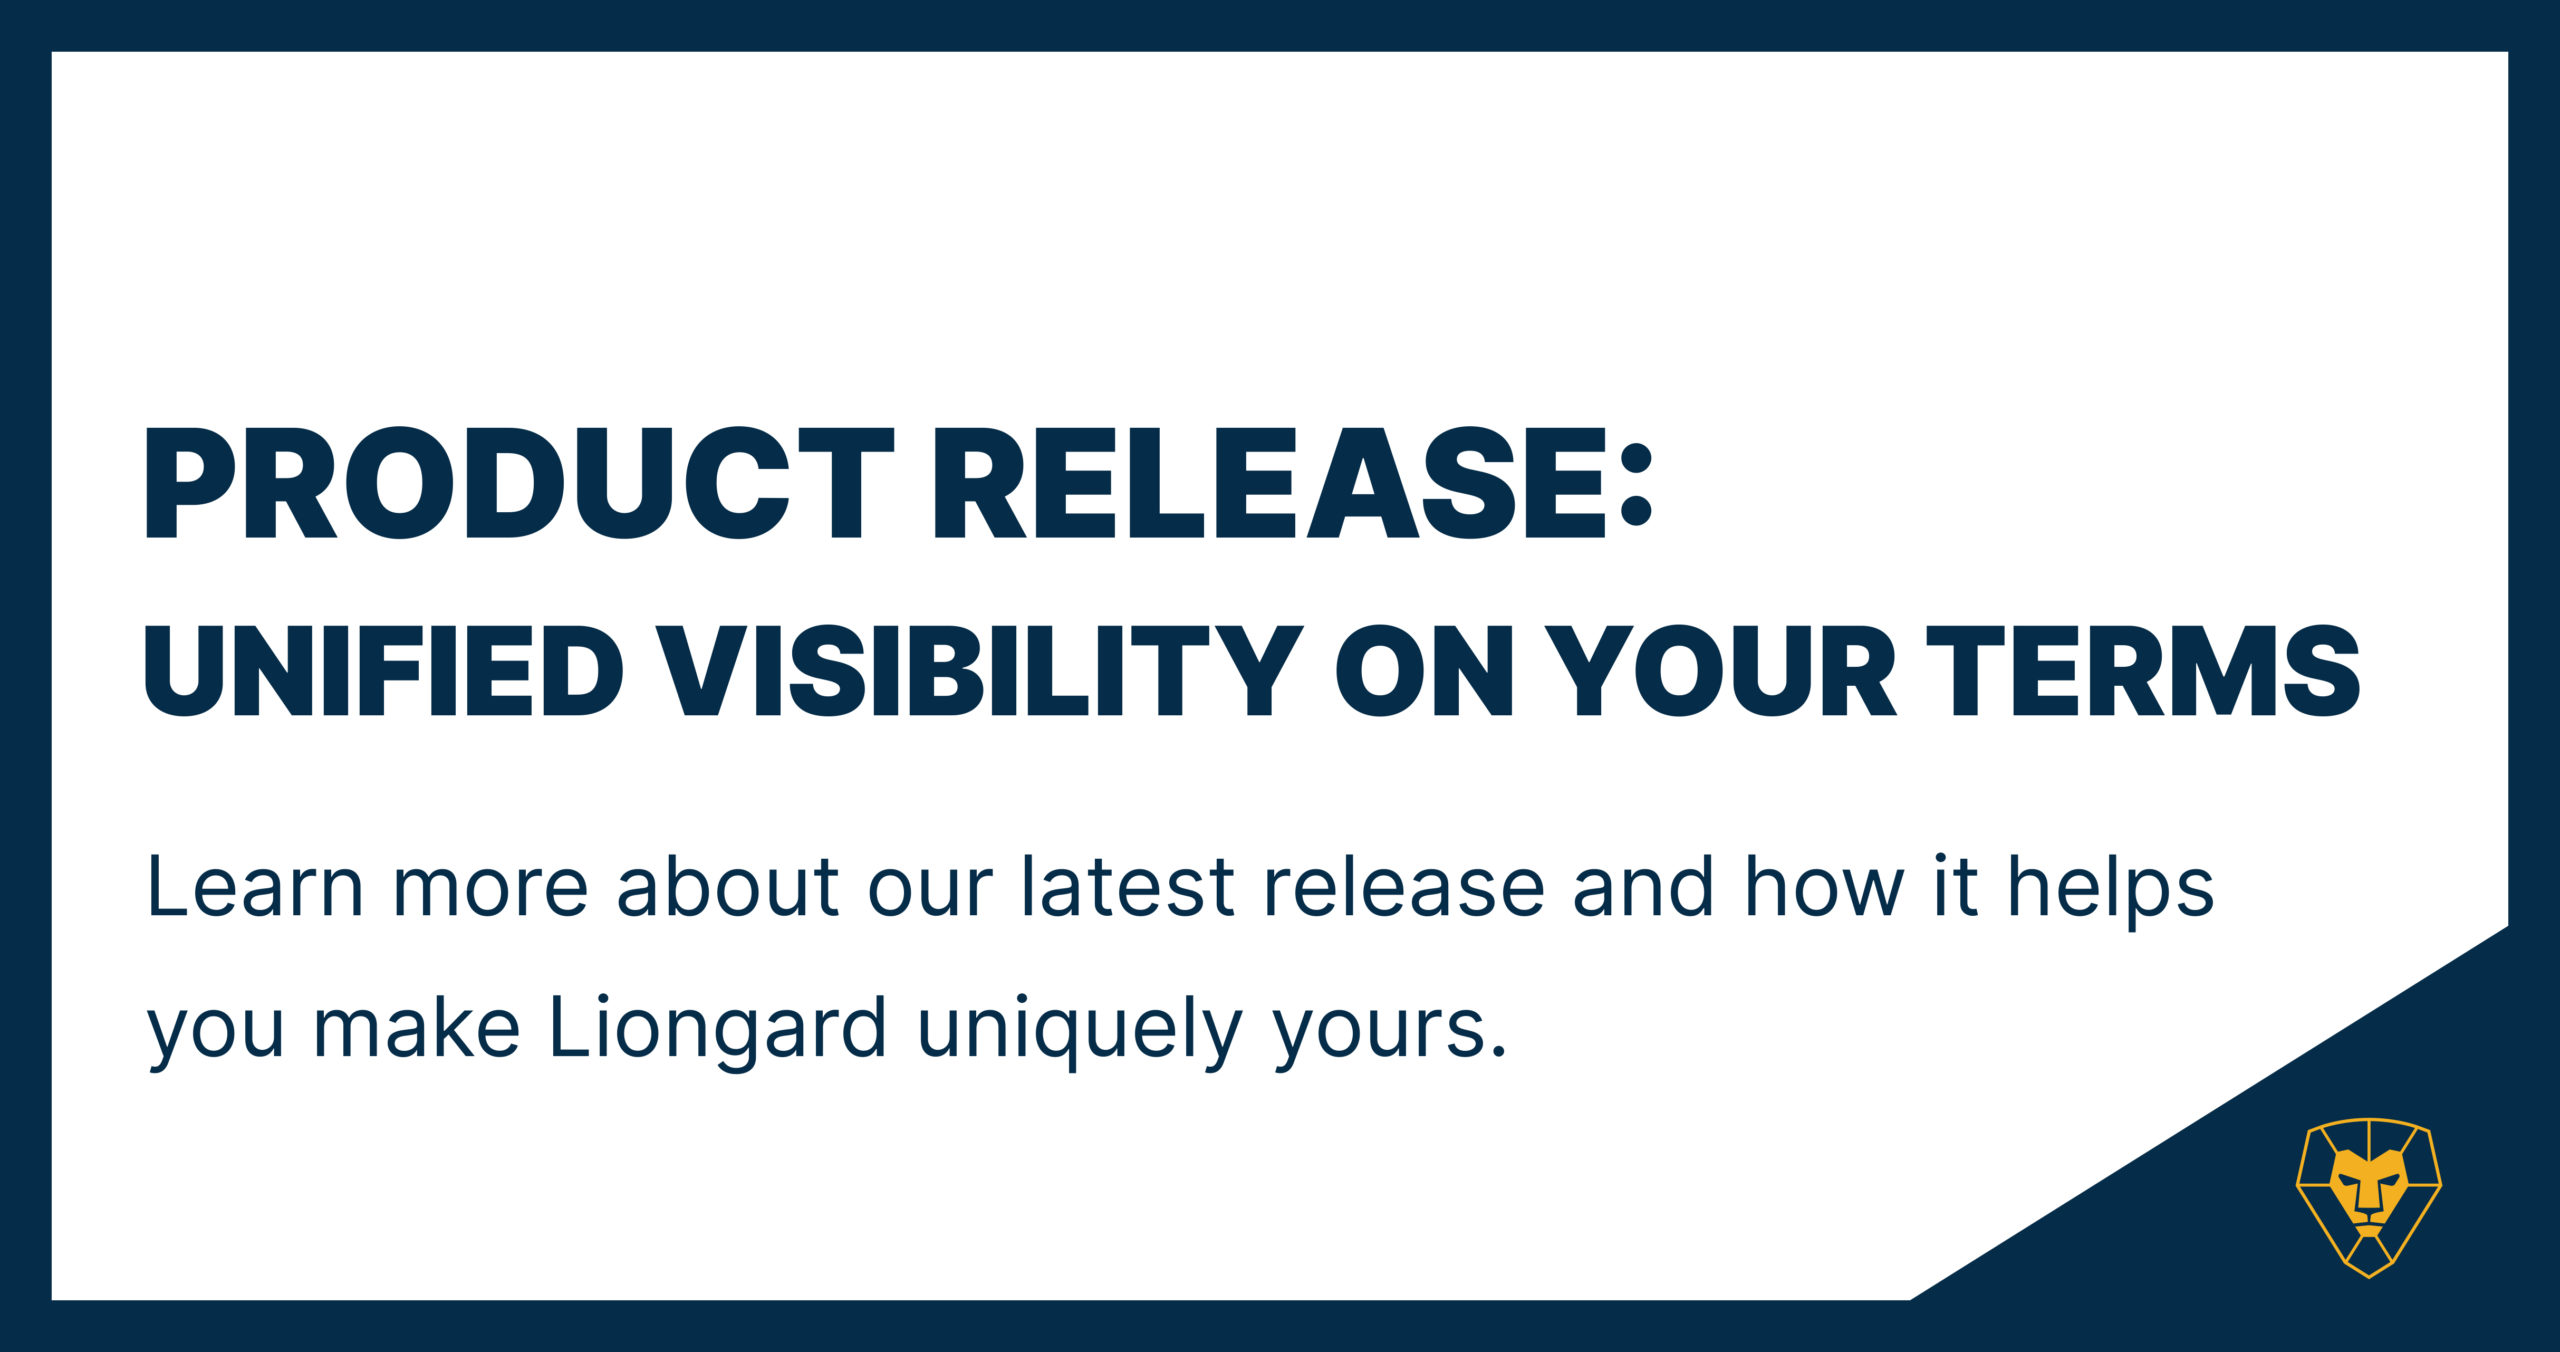 Product Release: Unified Visibility on Your Terms